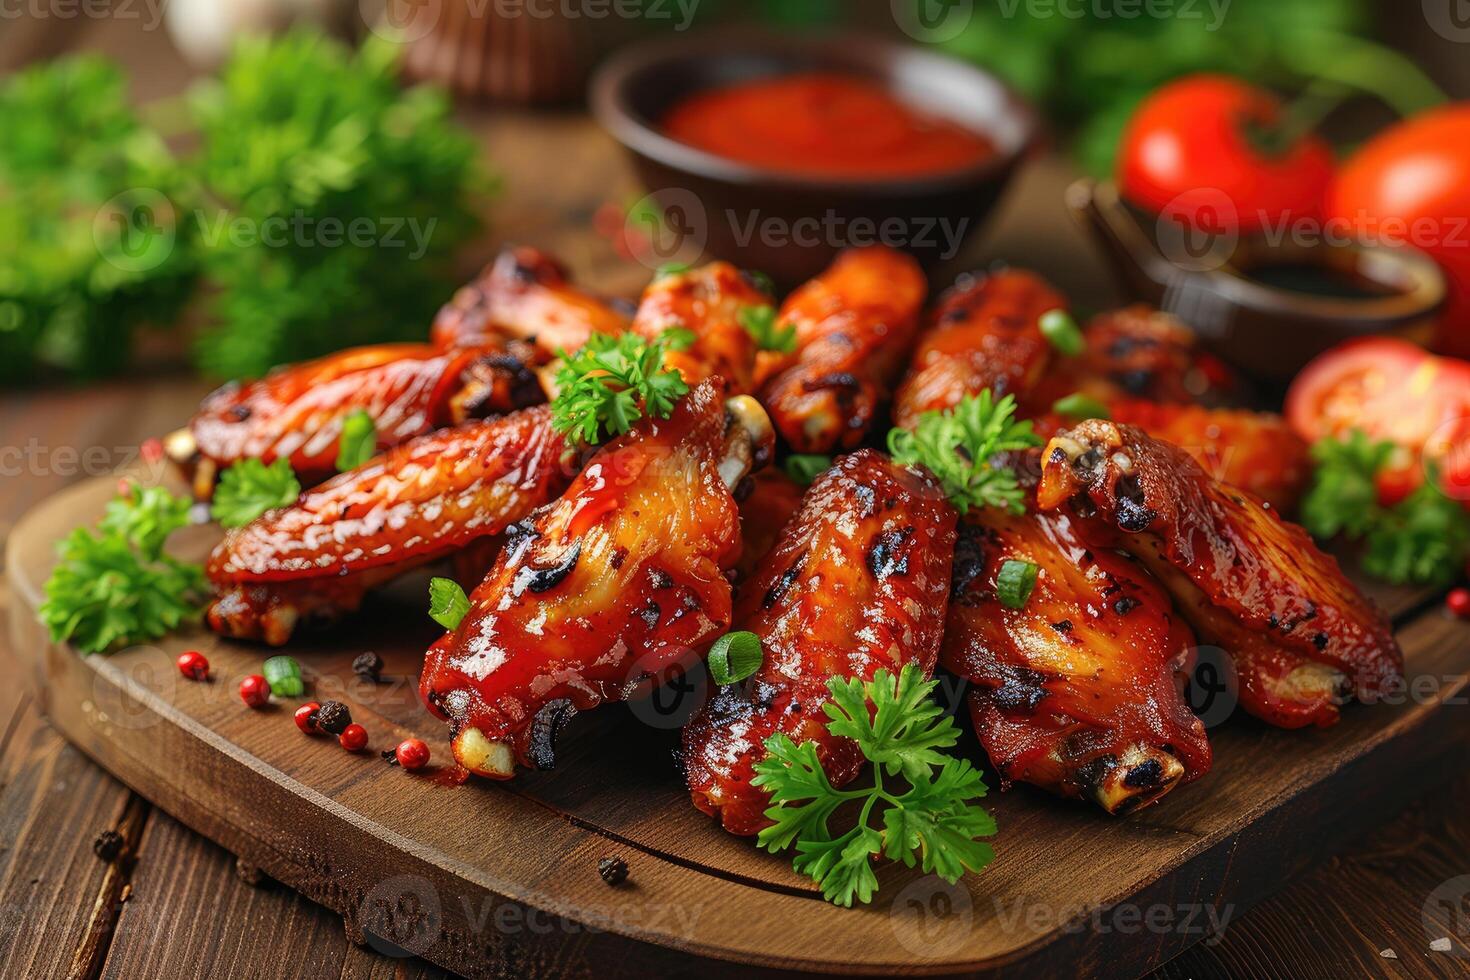 Chicken wings with barbecue sauce in the kitchen table professional advertising food photography photo